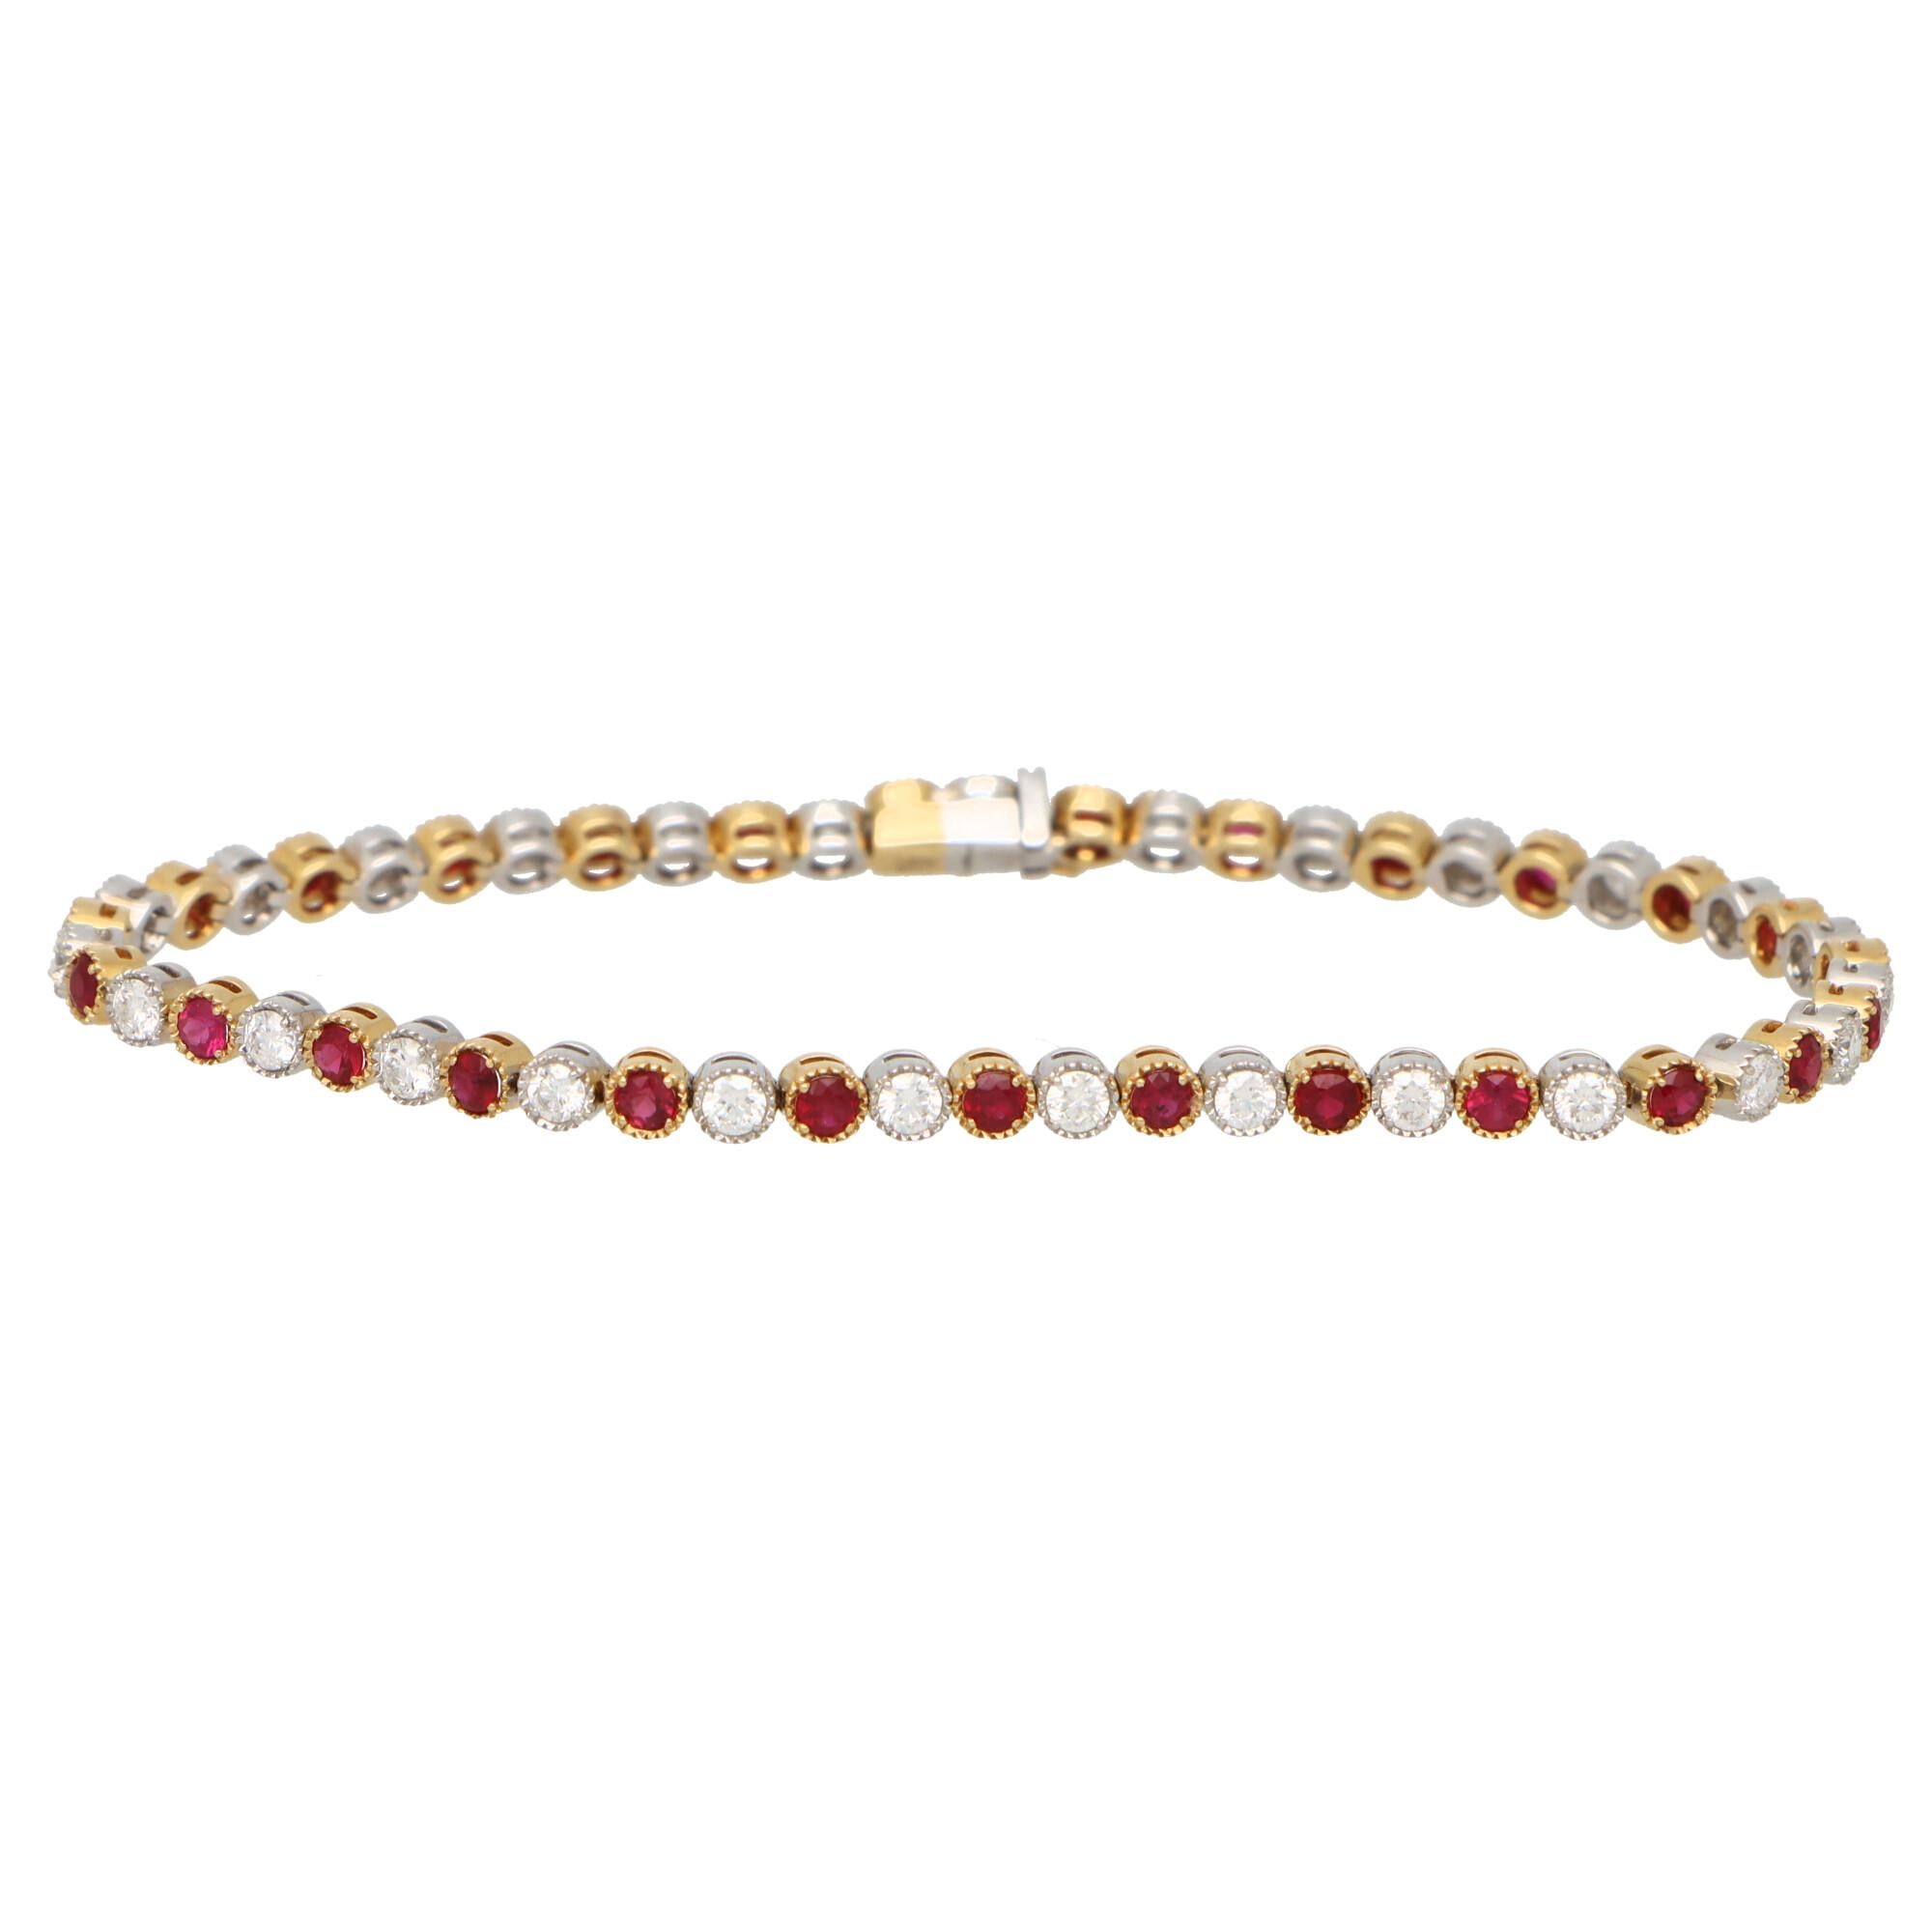 Round Cut Ruby and Diamond Tennis Line Bracelet Set in 18k Yellow and White Gold